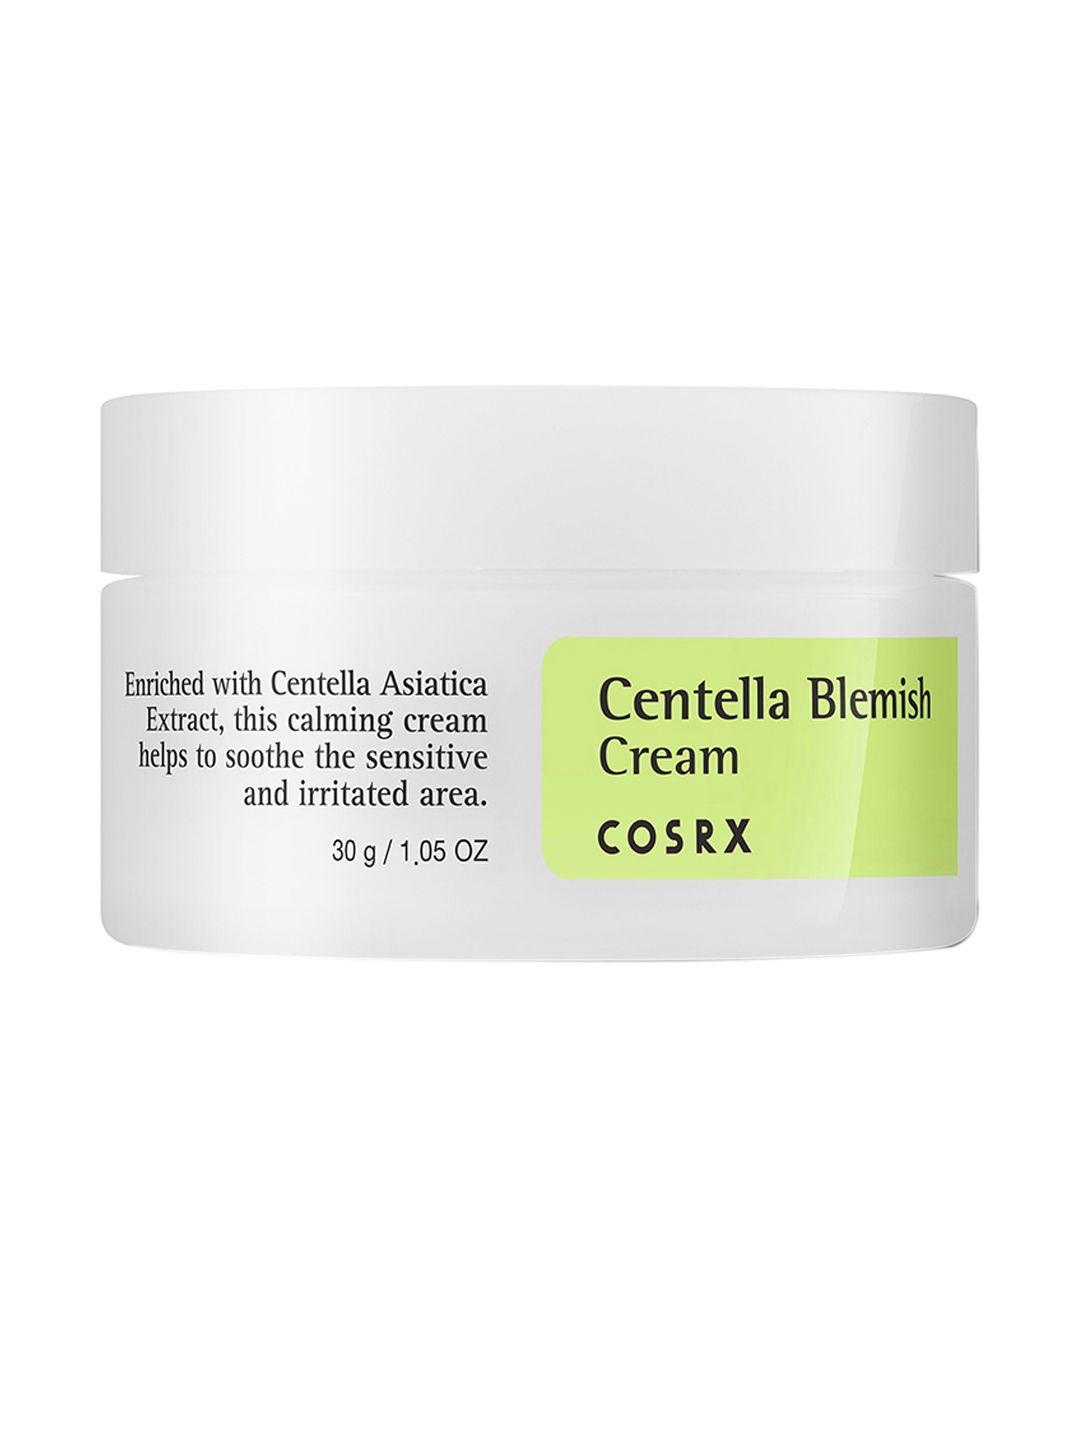 cosrx-centella-blemish-spot-cream-for-post-acne-care-to-soothe-sensitive-skin---30g